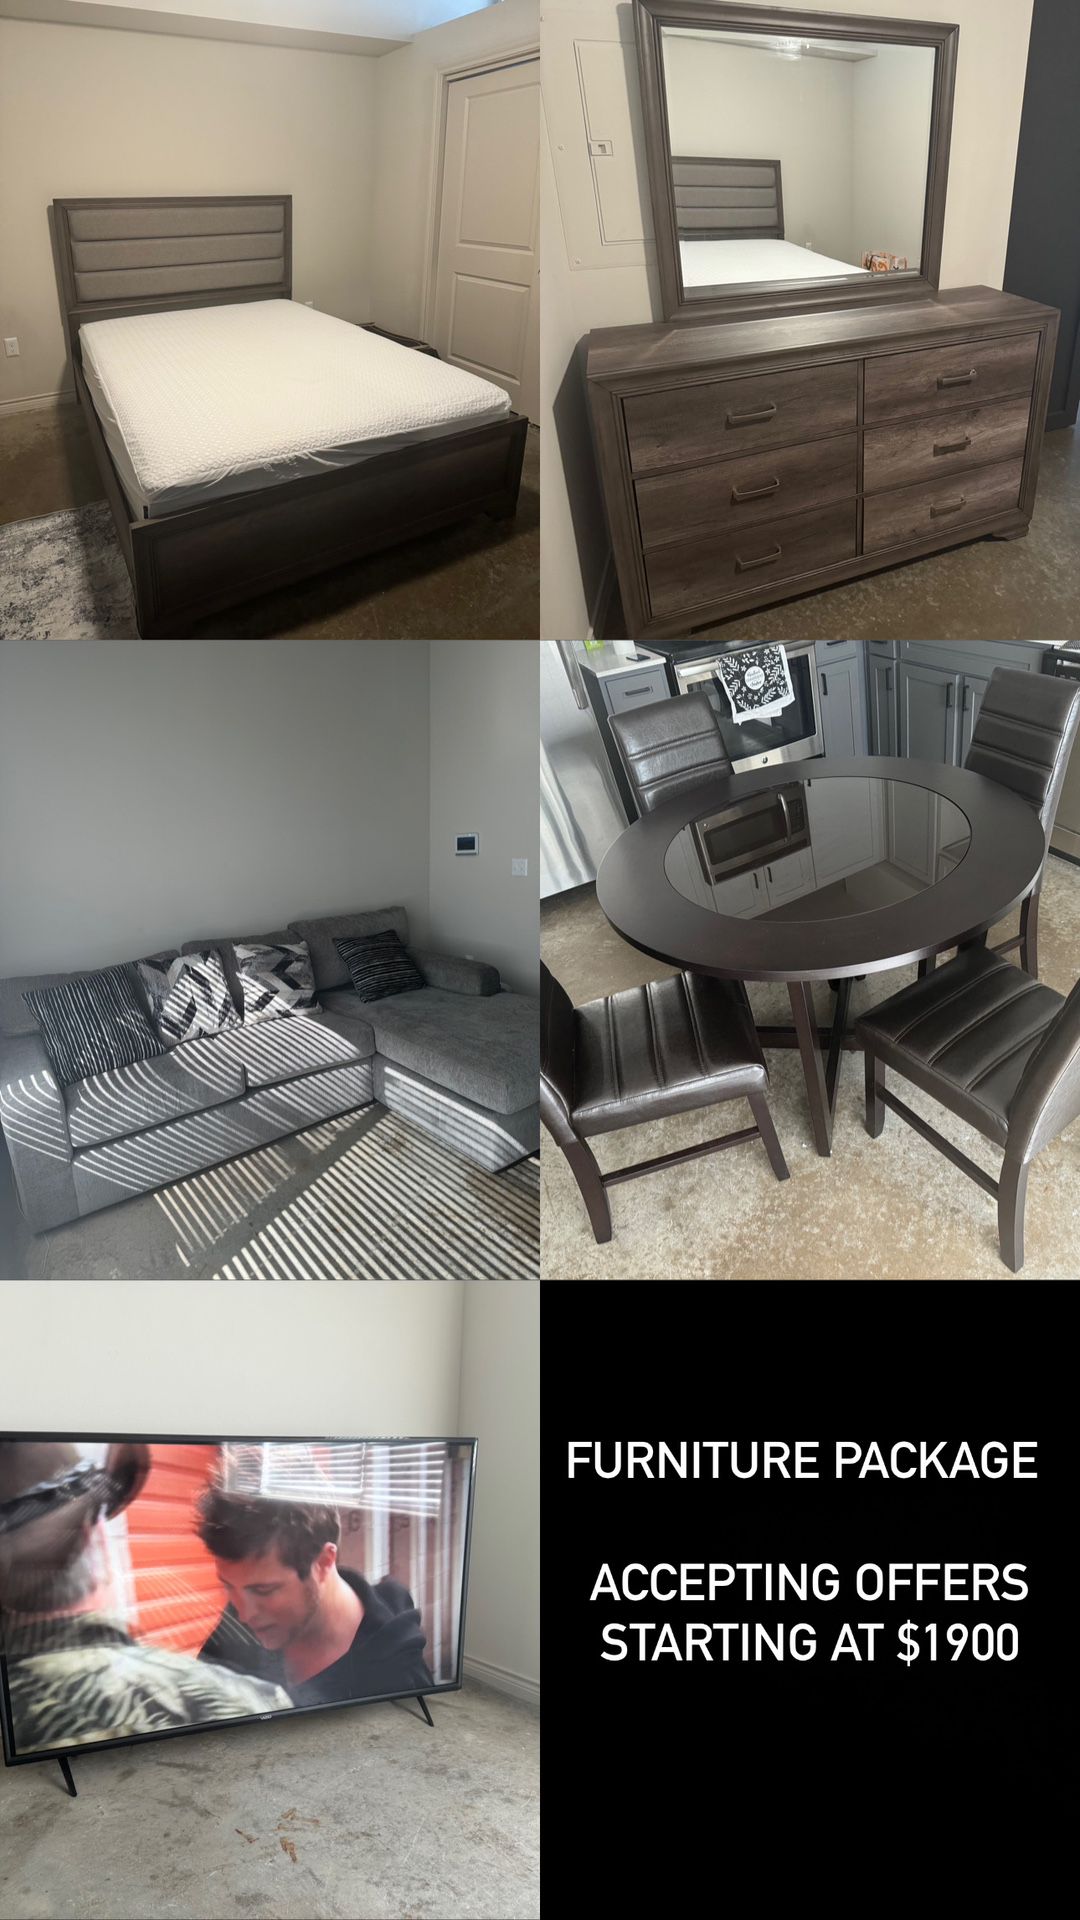 Brand New Furniture. Queen Bed, Dresser, Couch, Dinning Room, TV